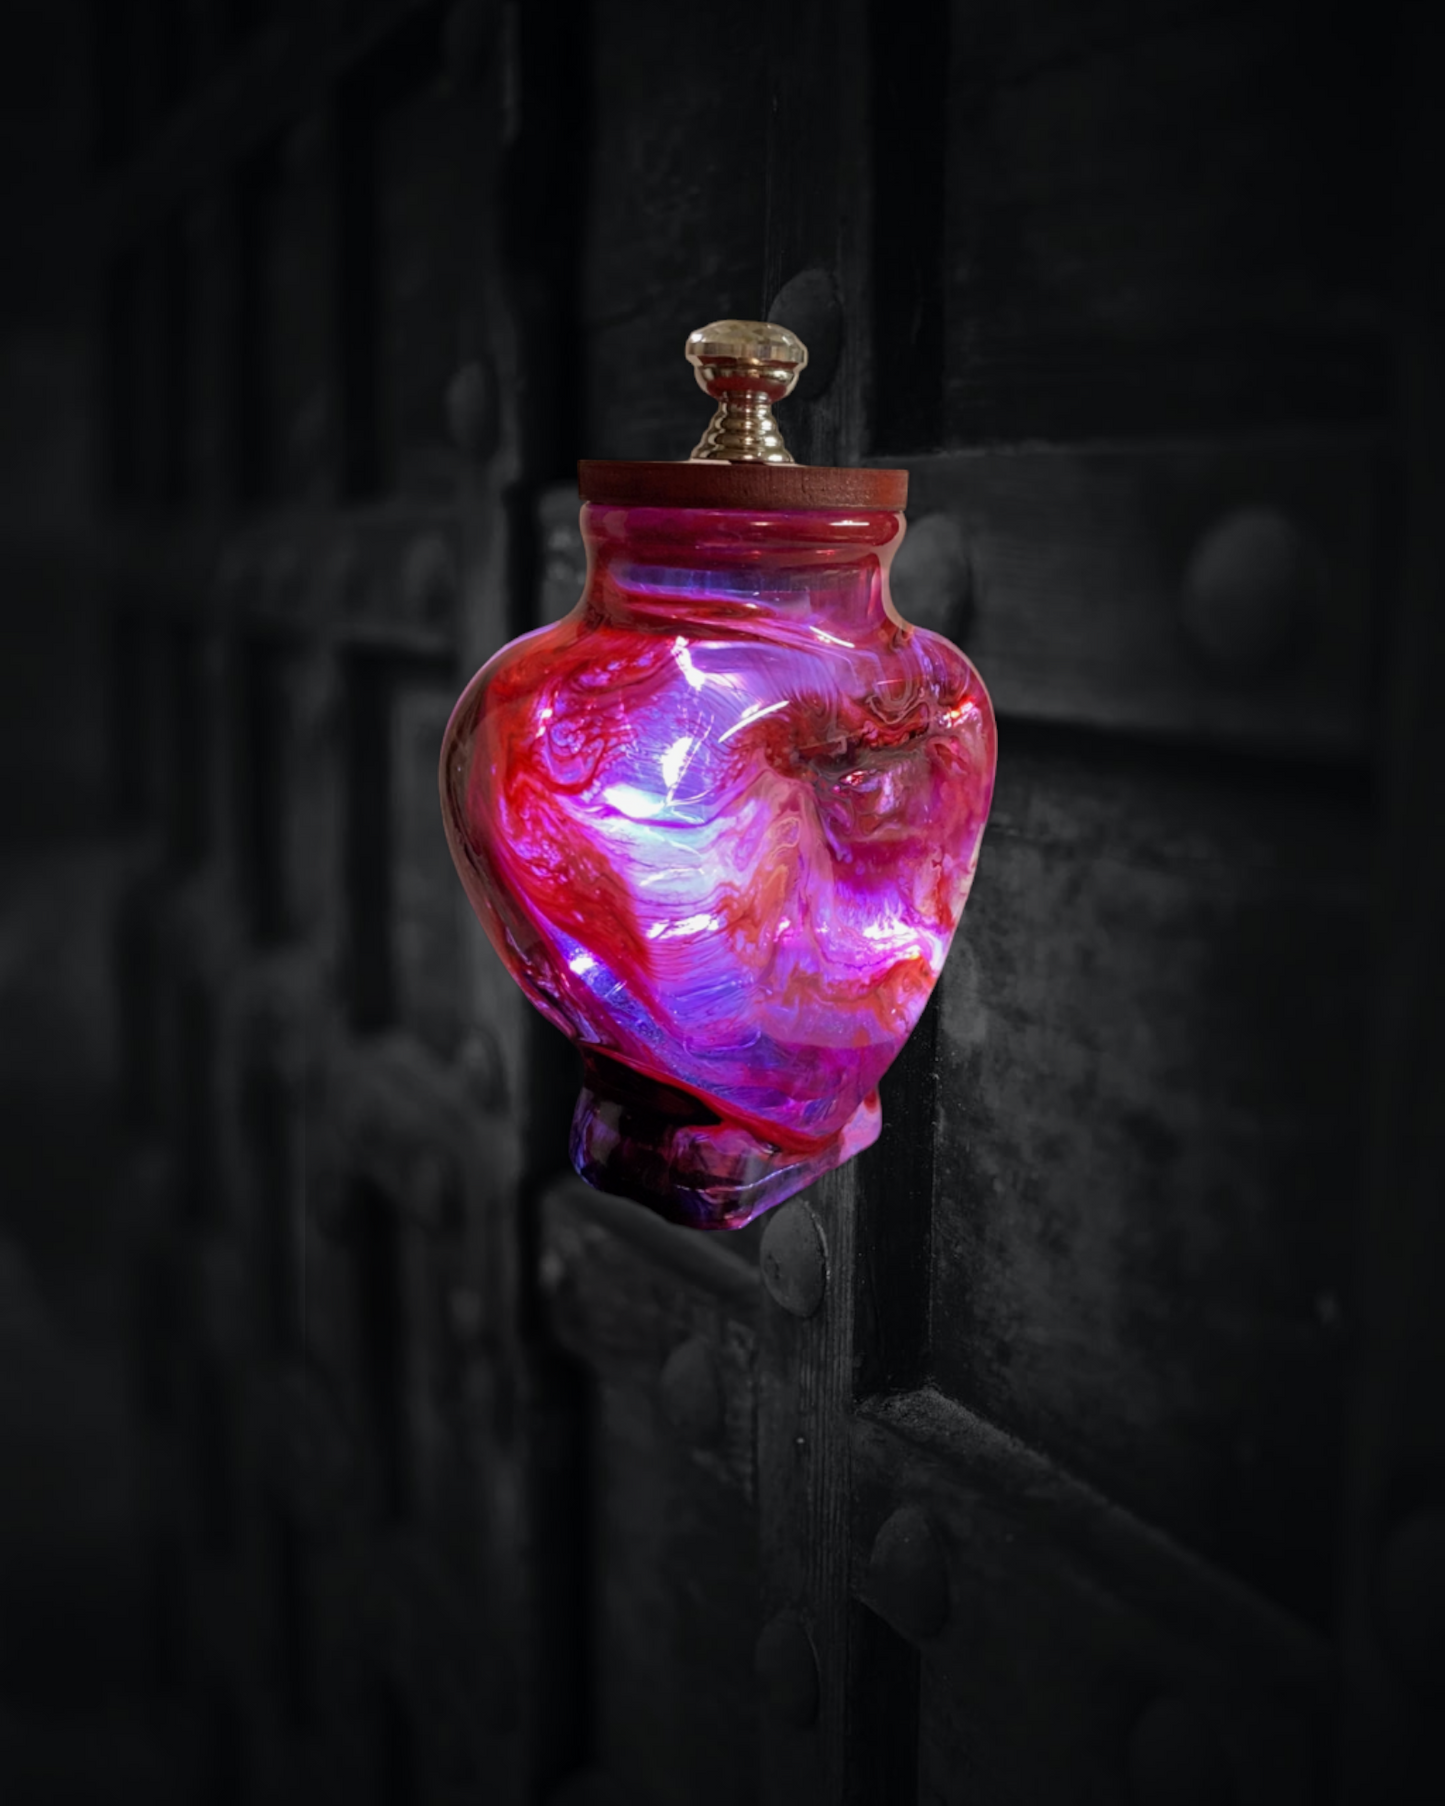 Red and White Glass Heart Jar with lights